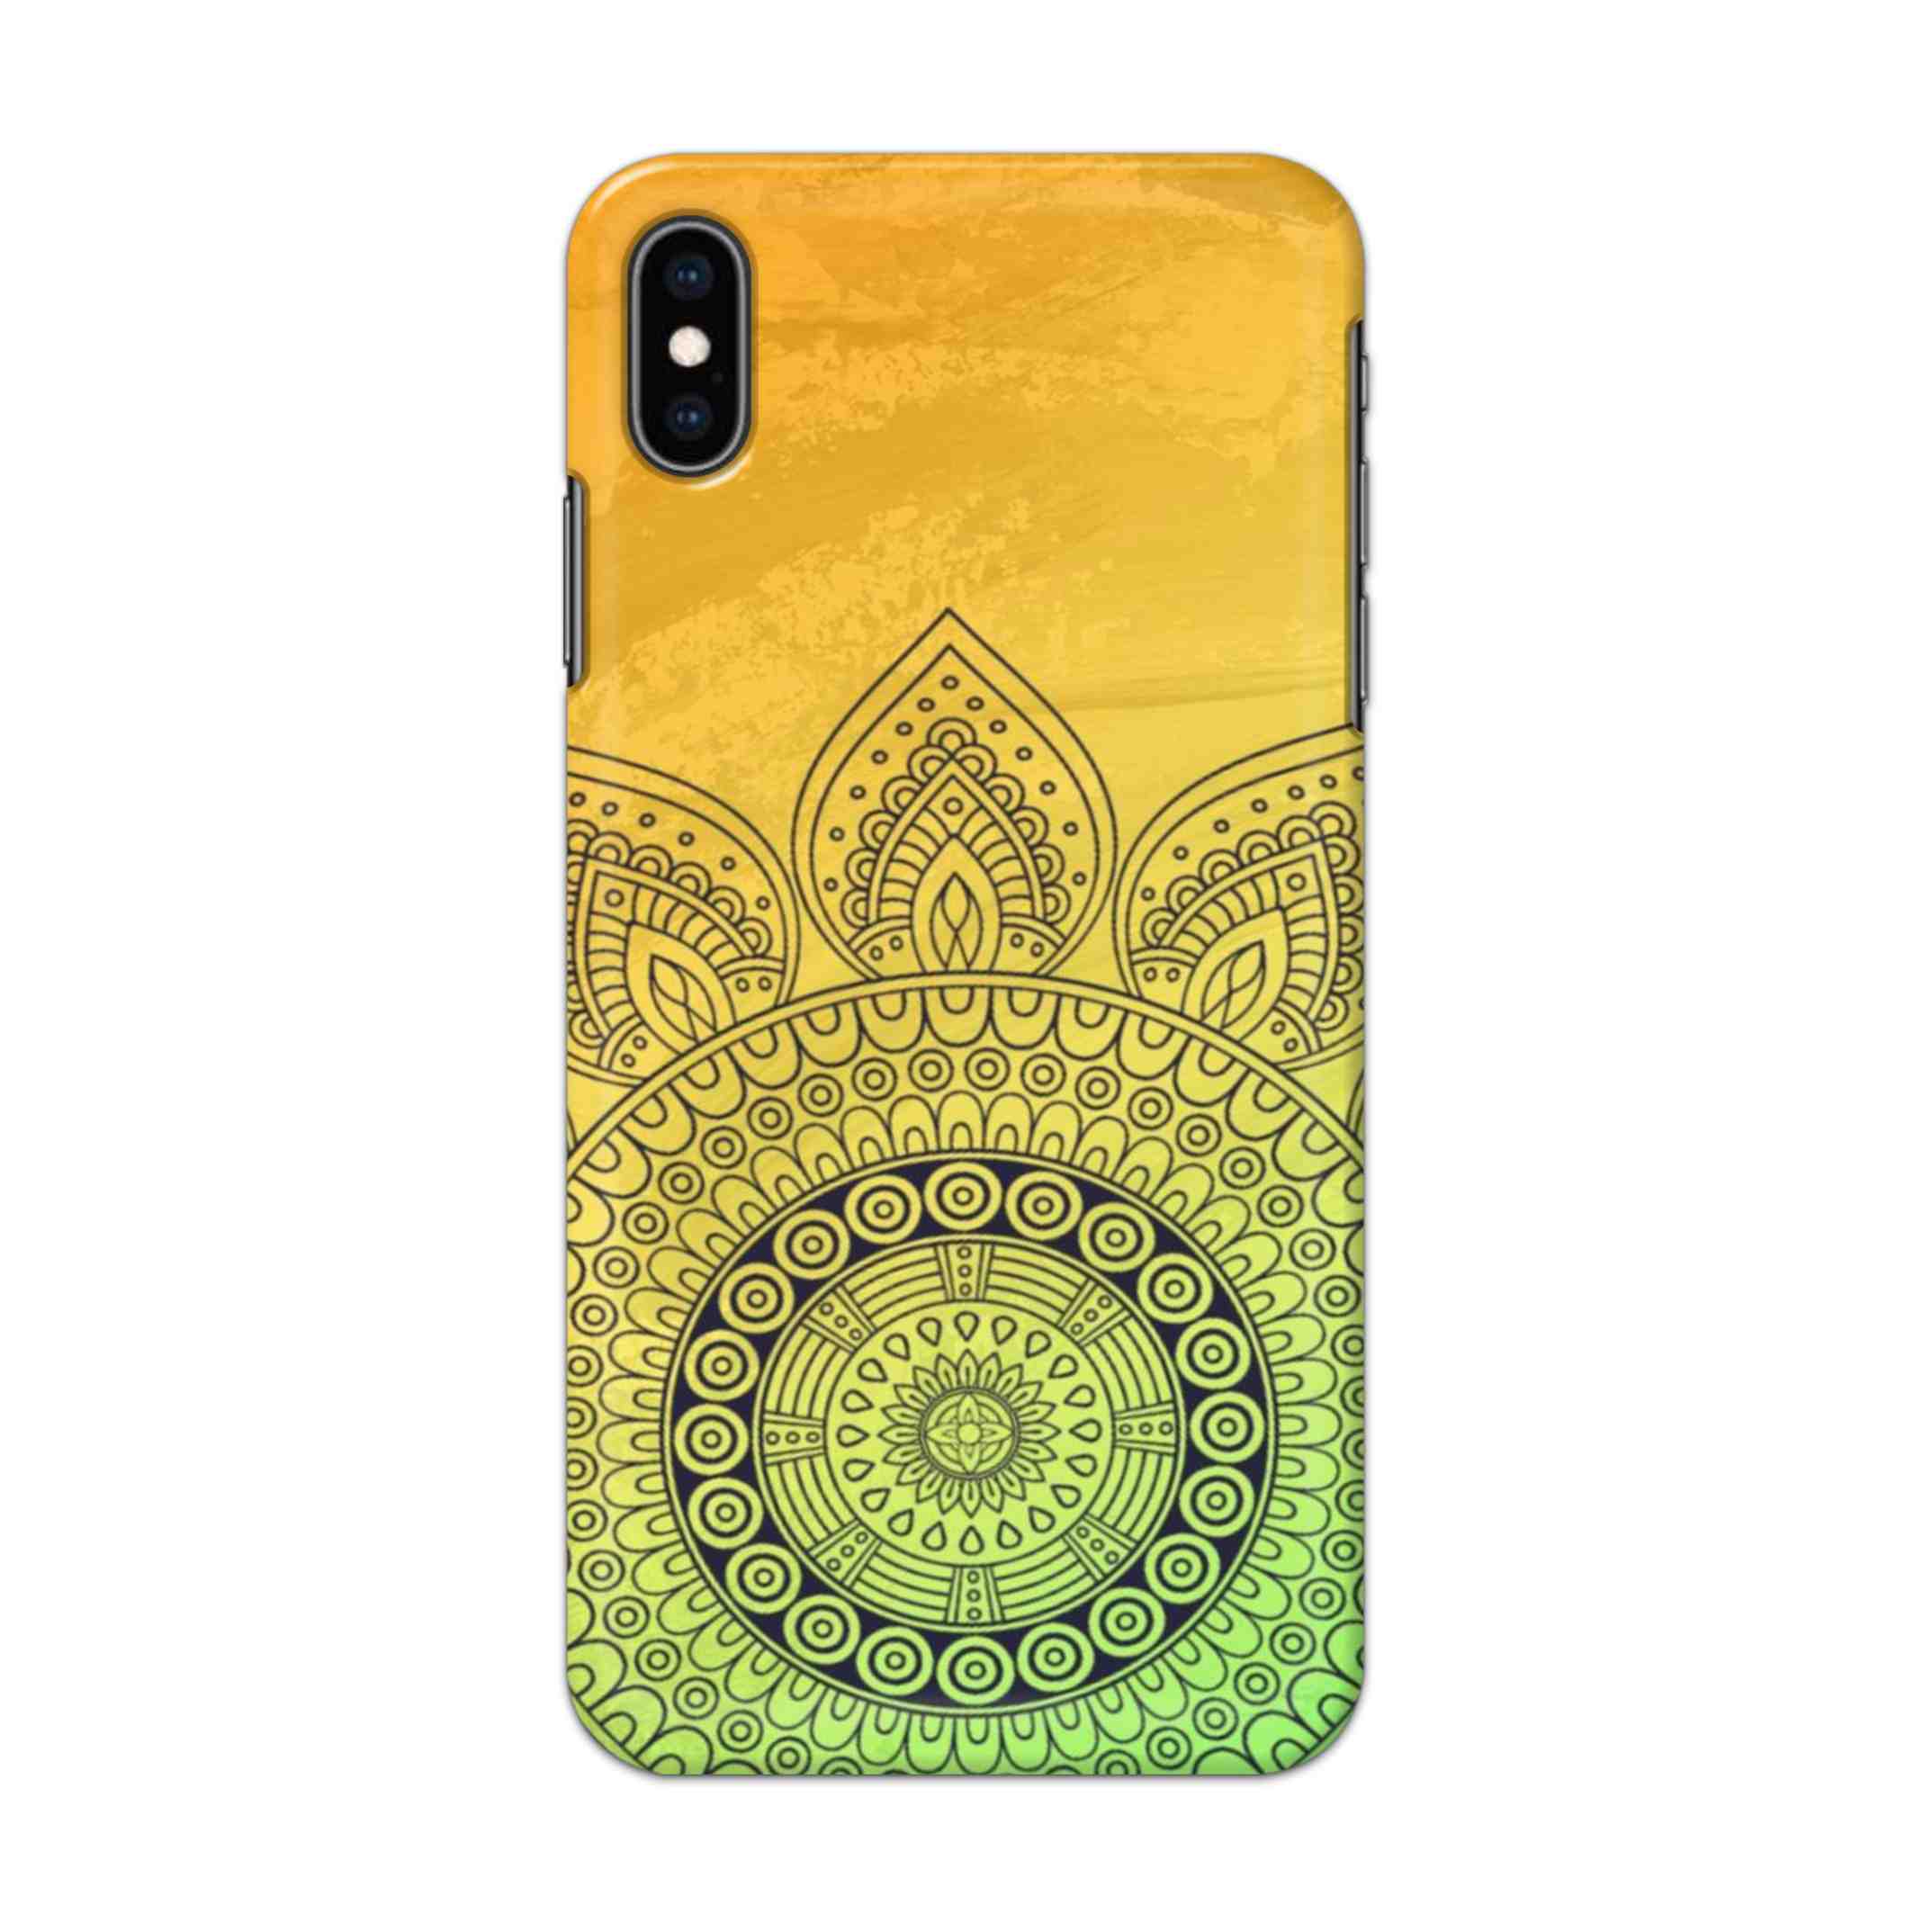 Buy Yellow Rangoli Hard Back Mobile Phone Case/Cover For iPhone XS MAX Online